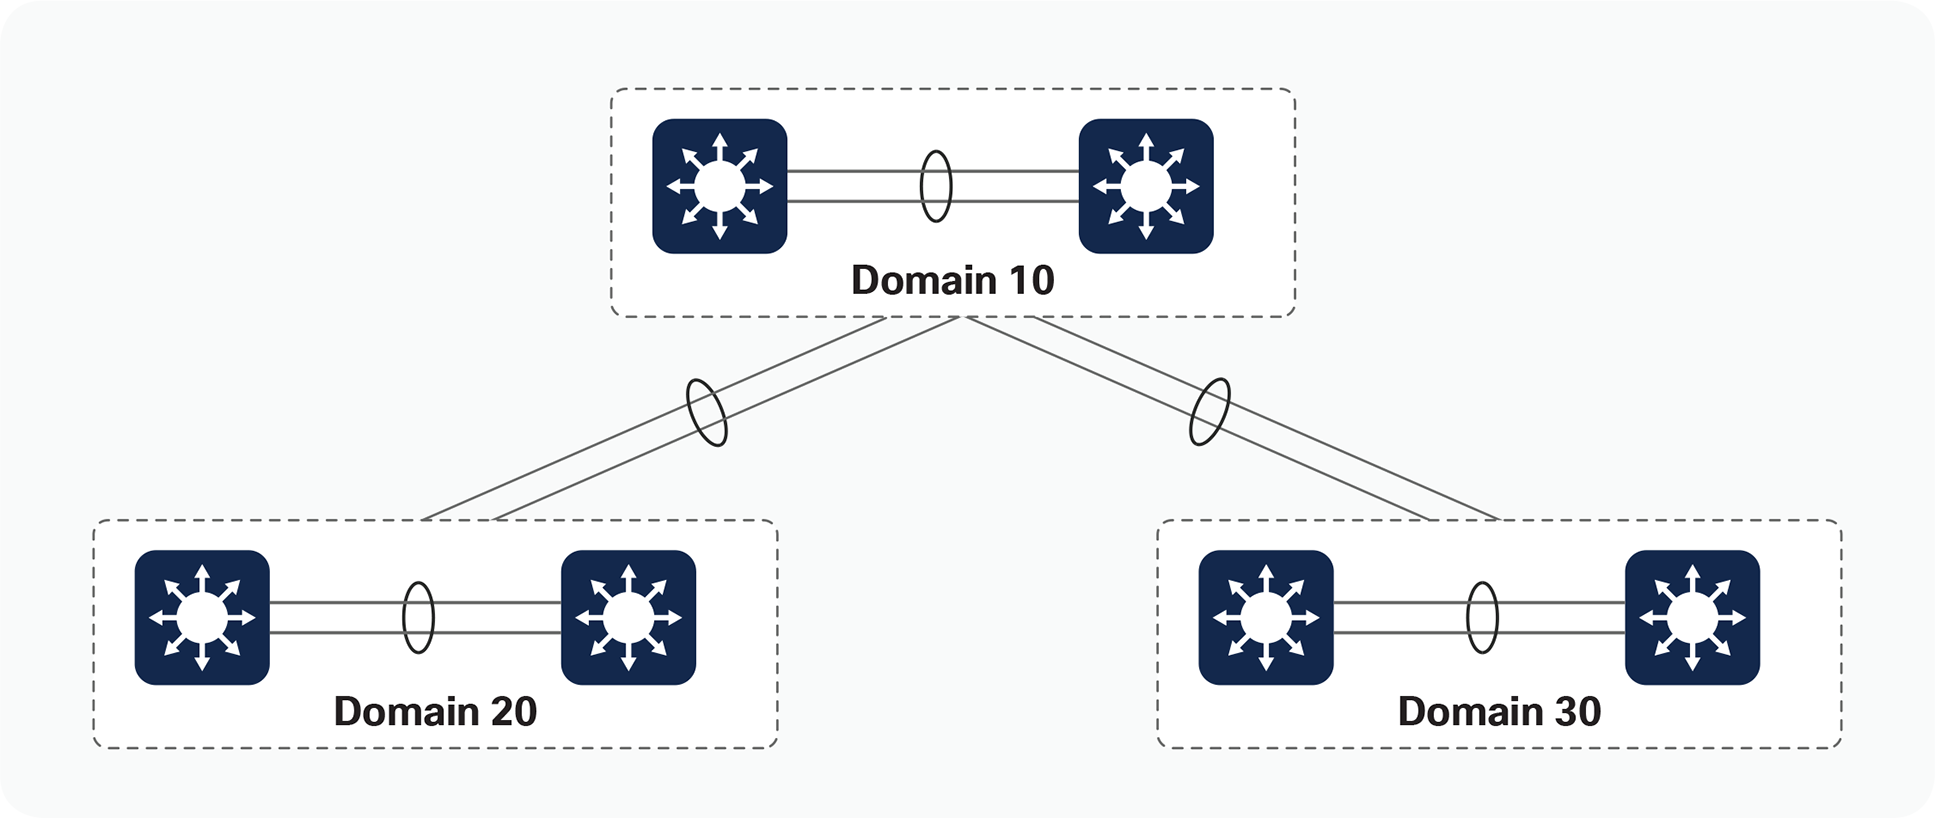 Multiple StackWise Virtual domains